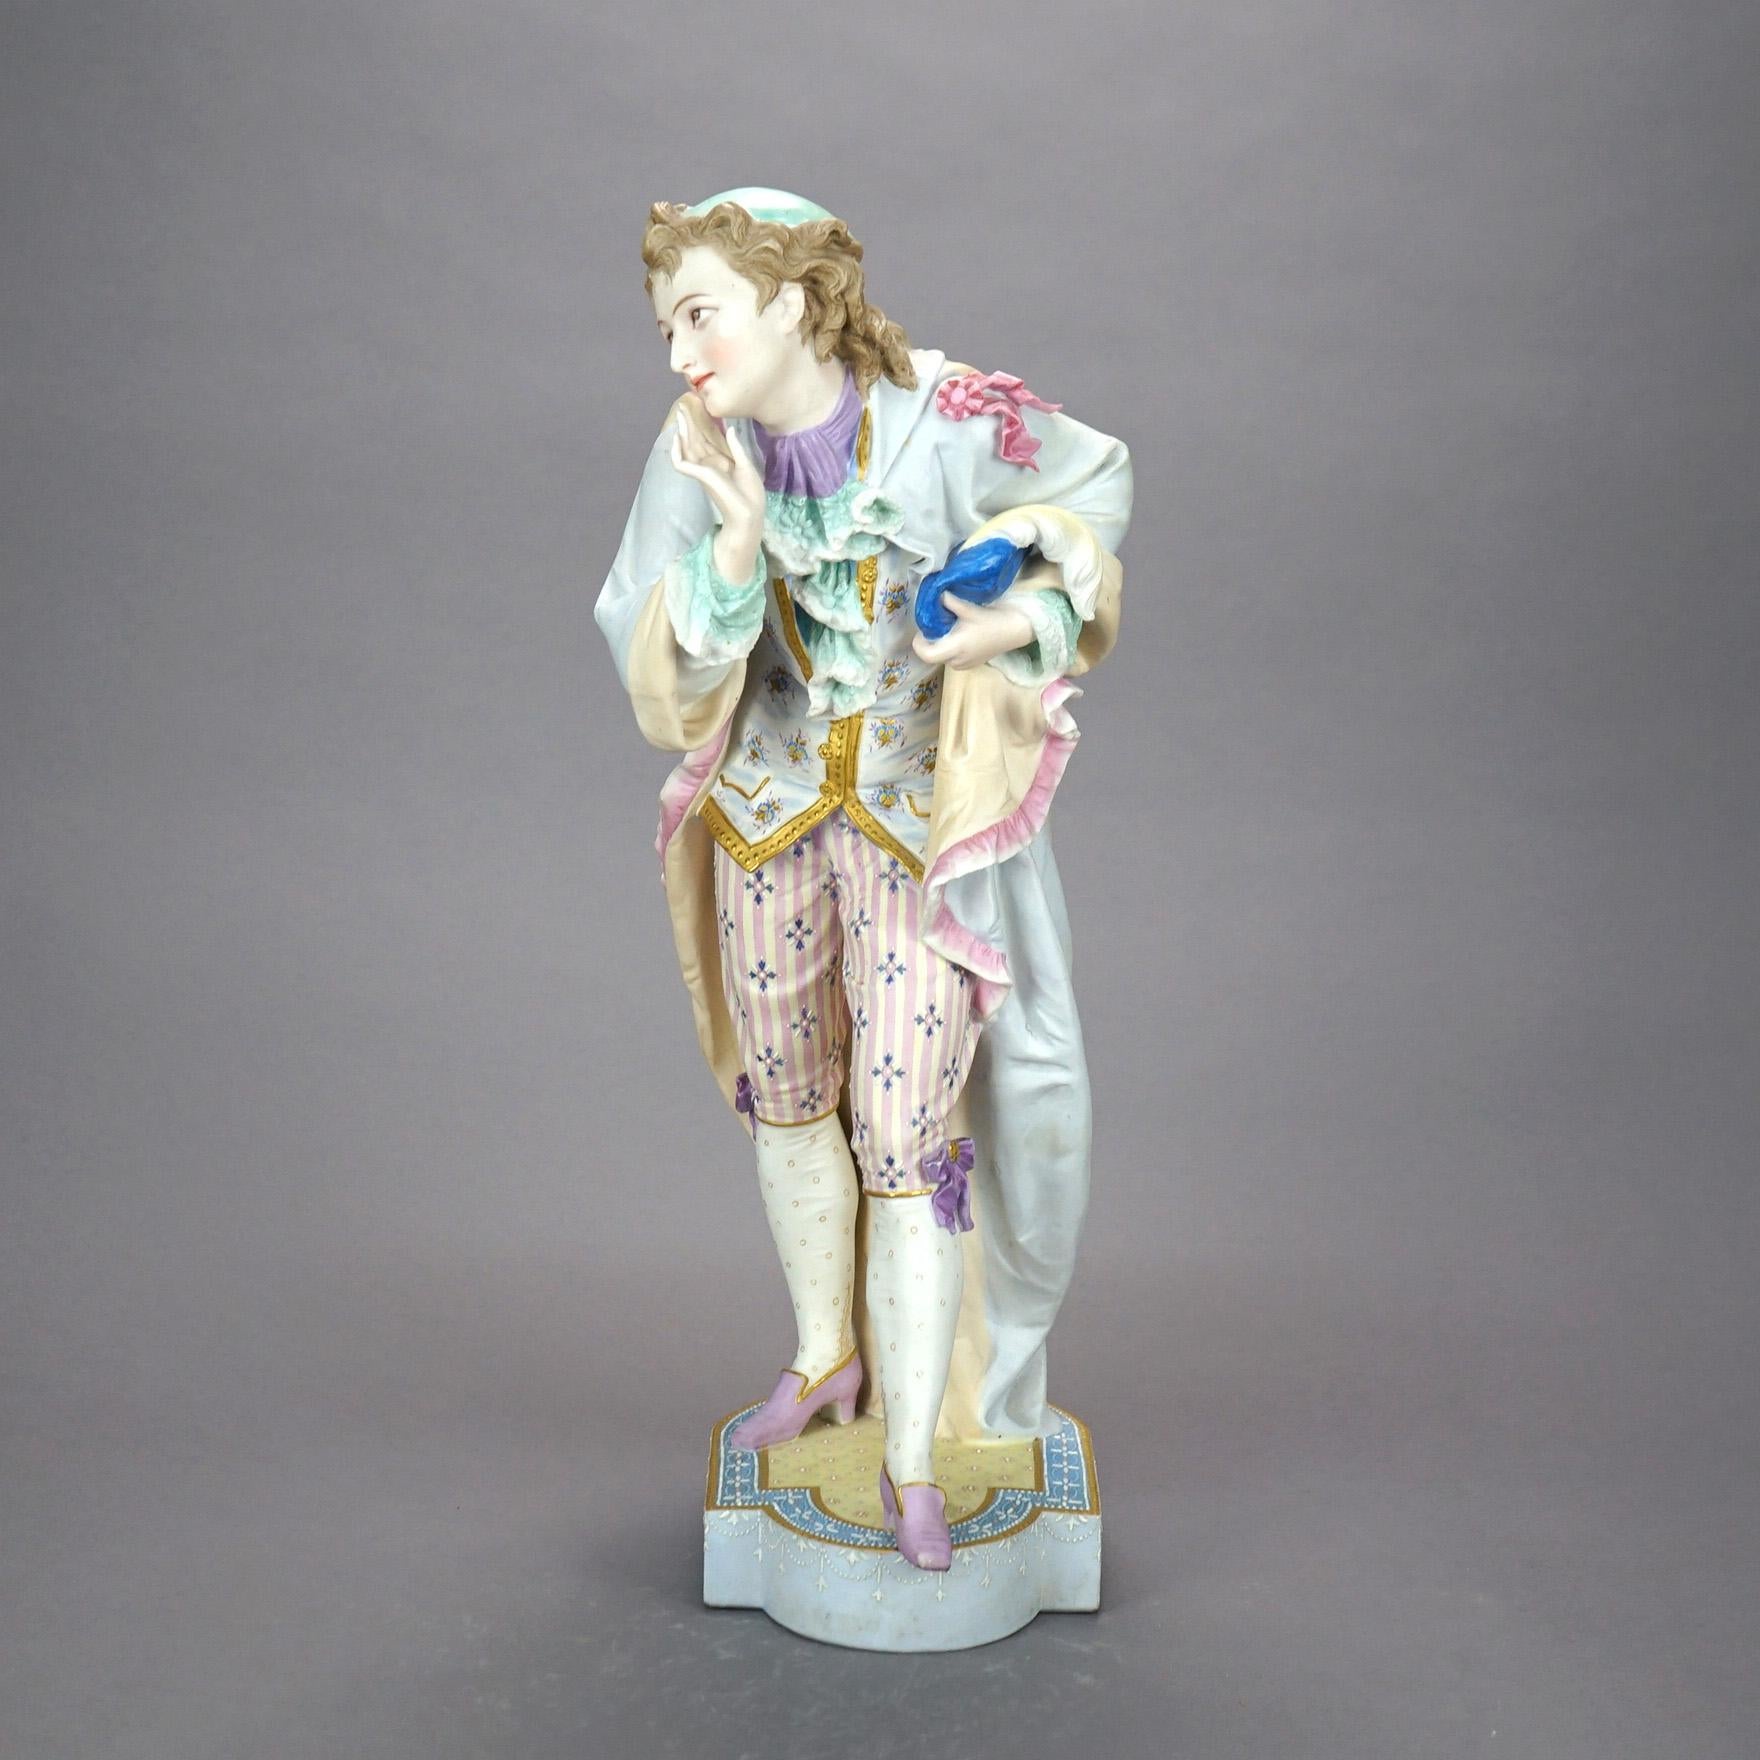 An antique and large English figure by Chelsea or Vion et Baury, Paris offers porcelain construction in the form a a young man in countryside setting, hand painted with gilt highlights throughout, green anchor mark as photographed, 19th